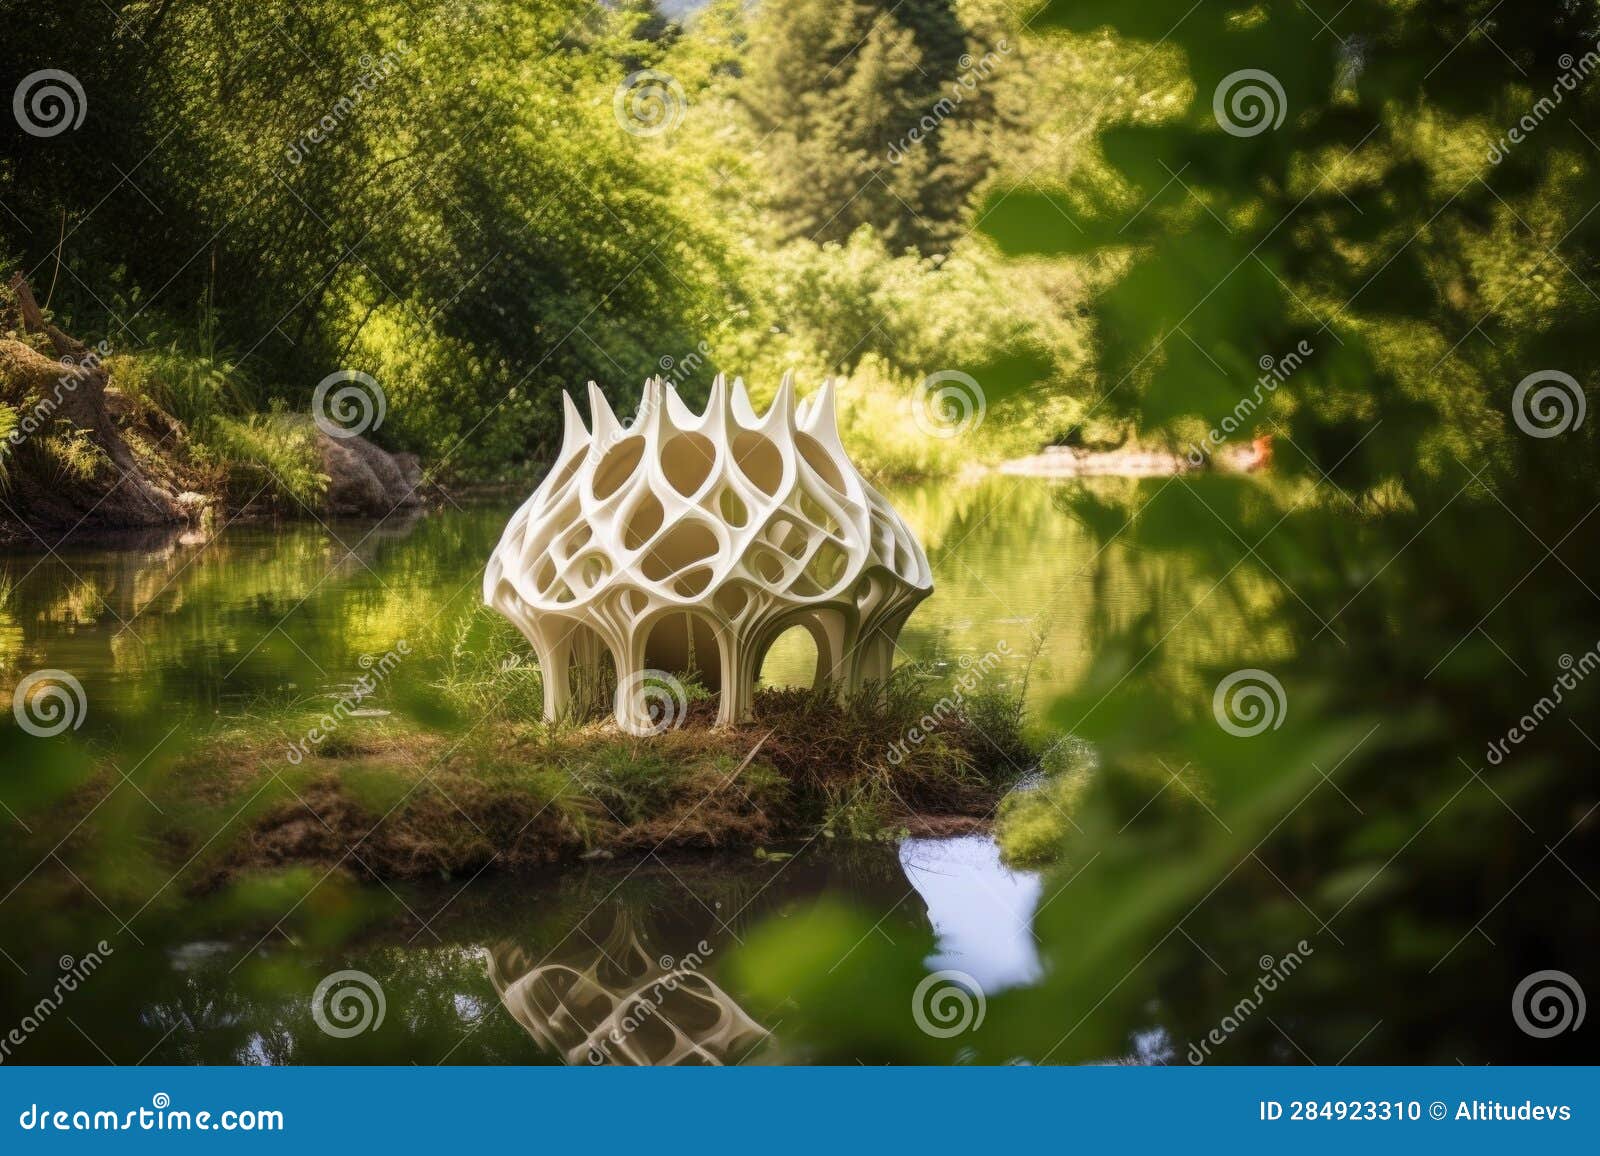 4d printed eco-friendly structures in nature